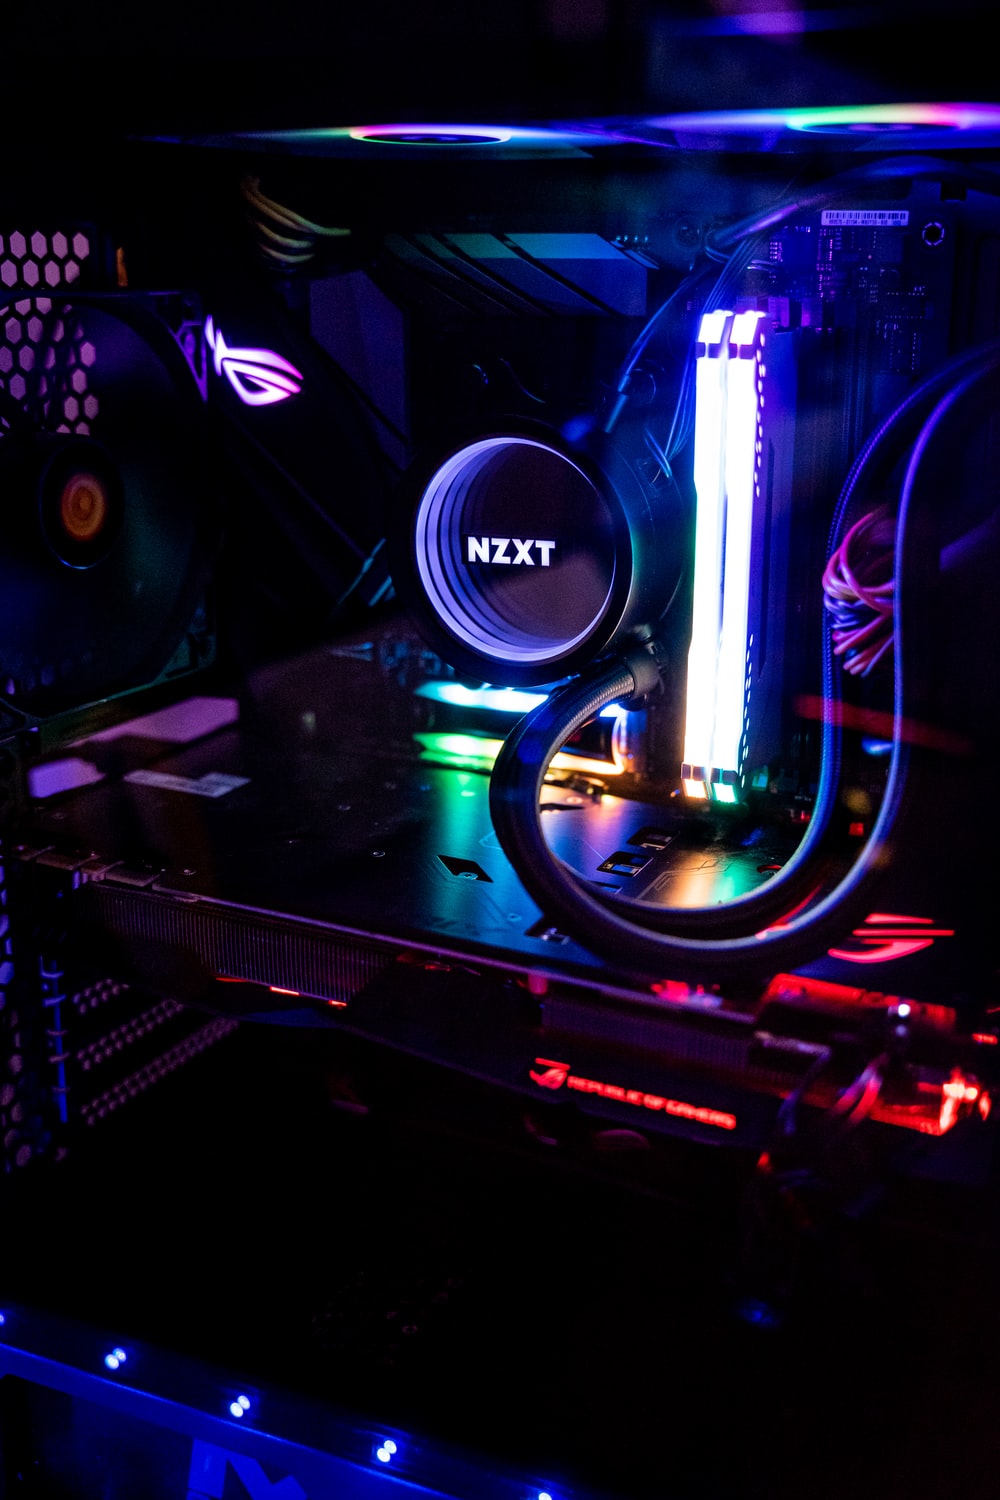 Pc Build Picture. Download Free Image